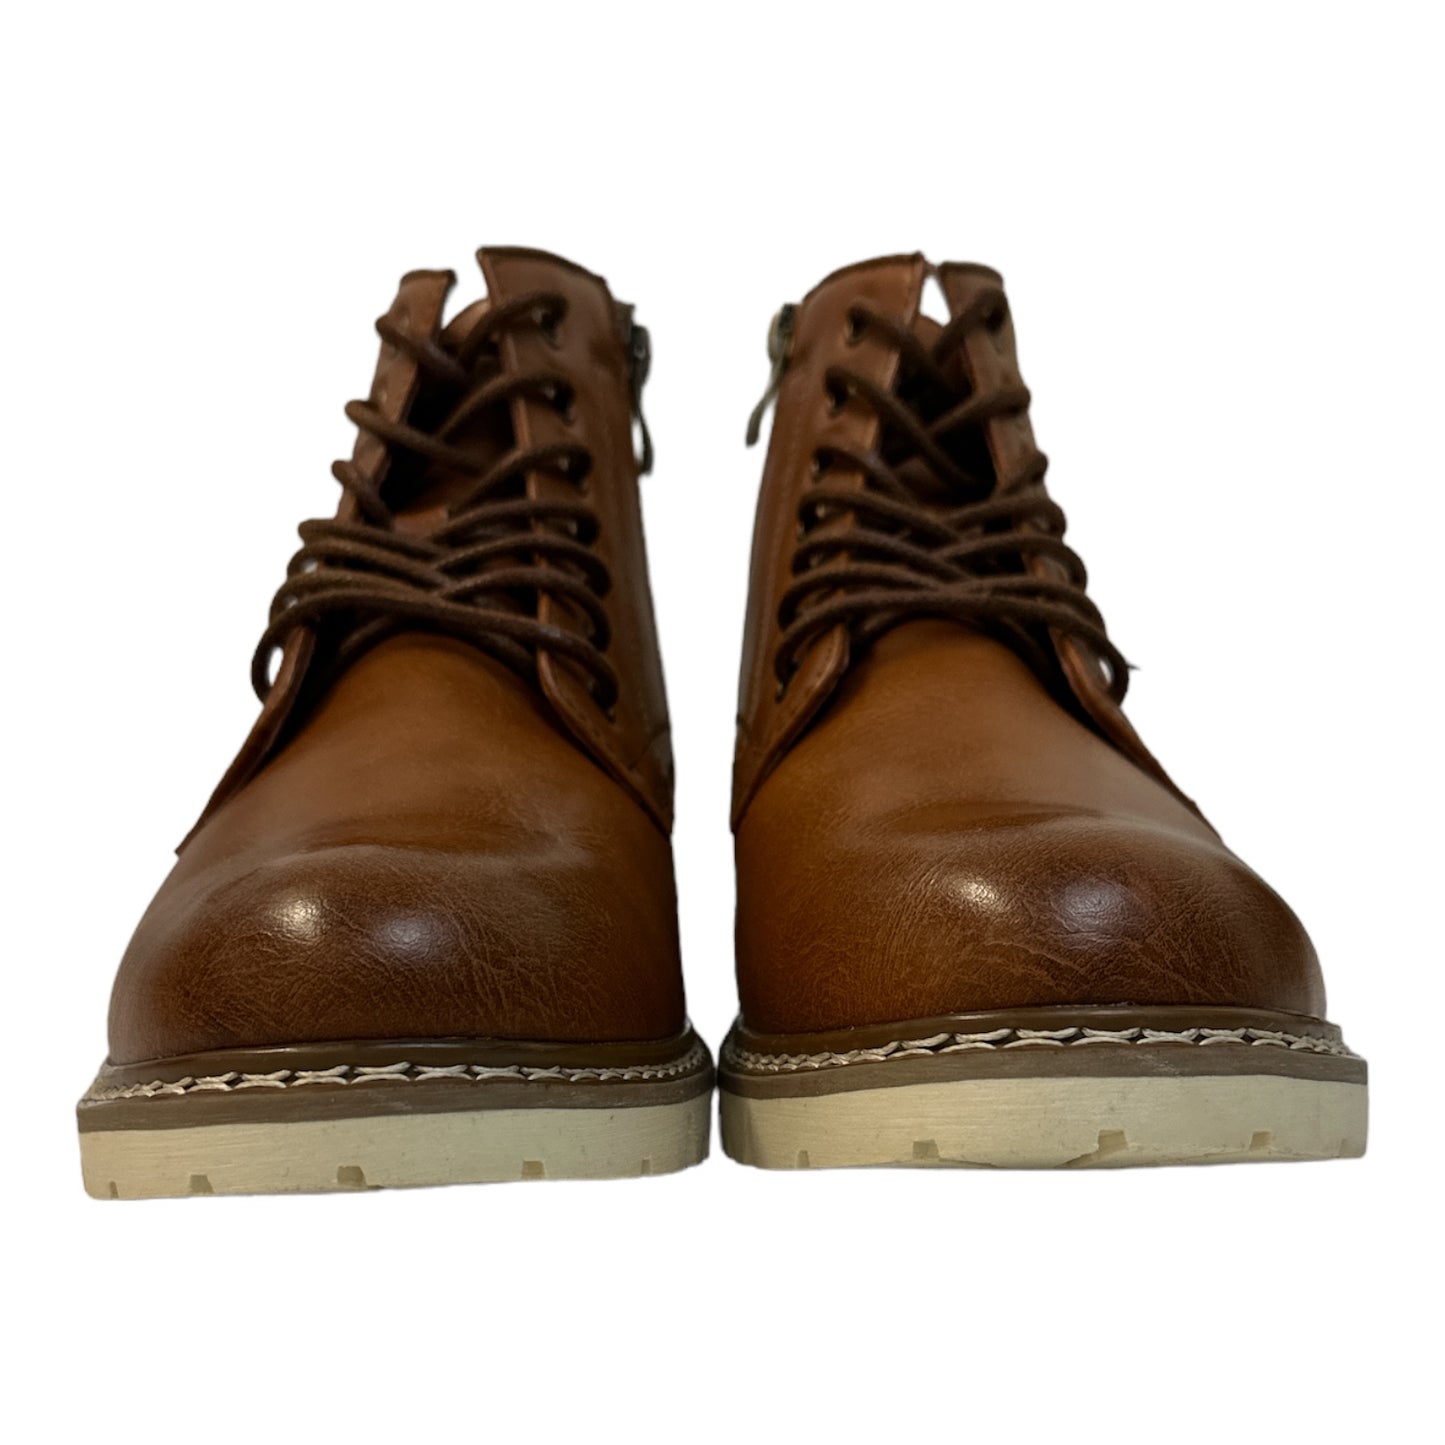 Steve Madden Men's Lightweight Lace-Up Broome Chukka Ankle Boots